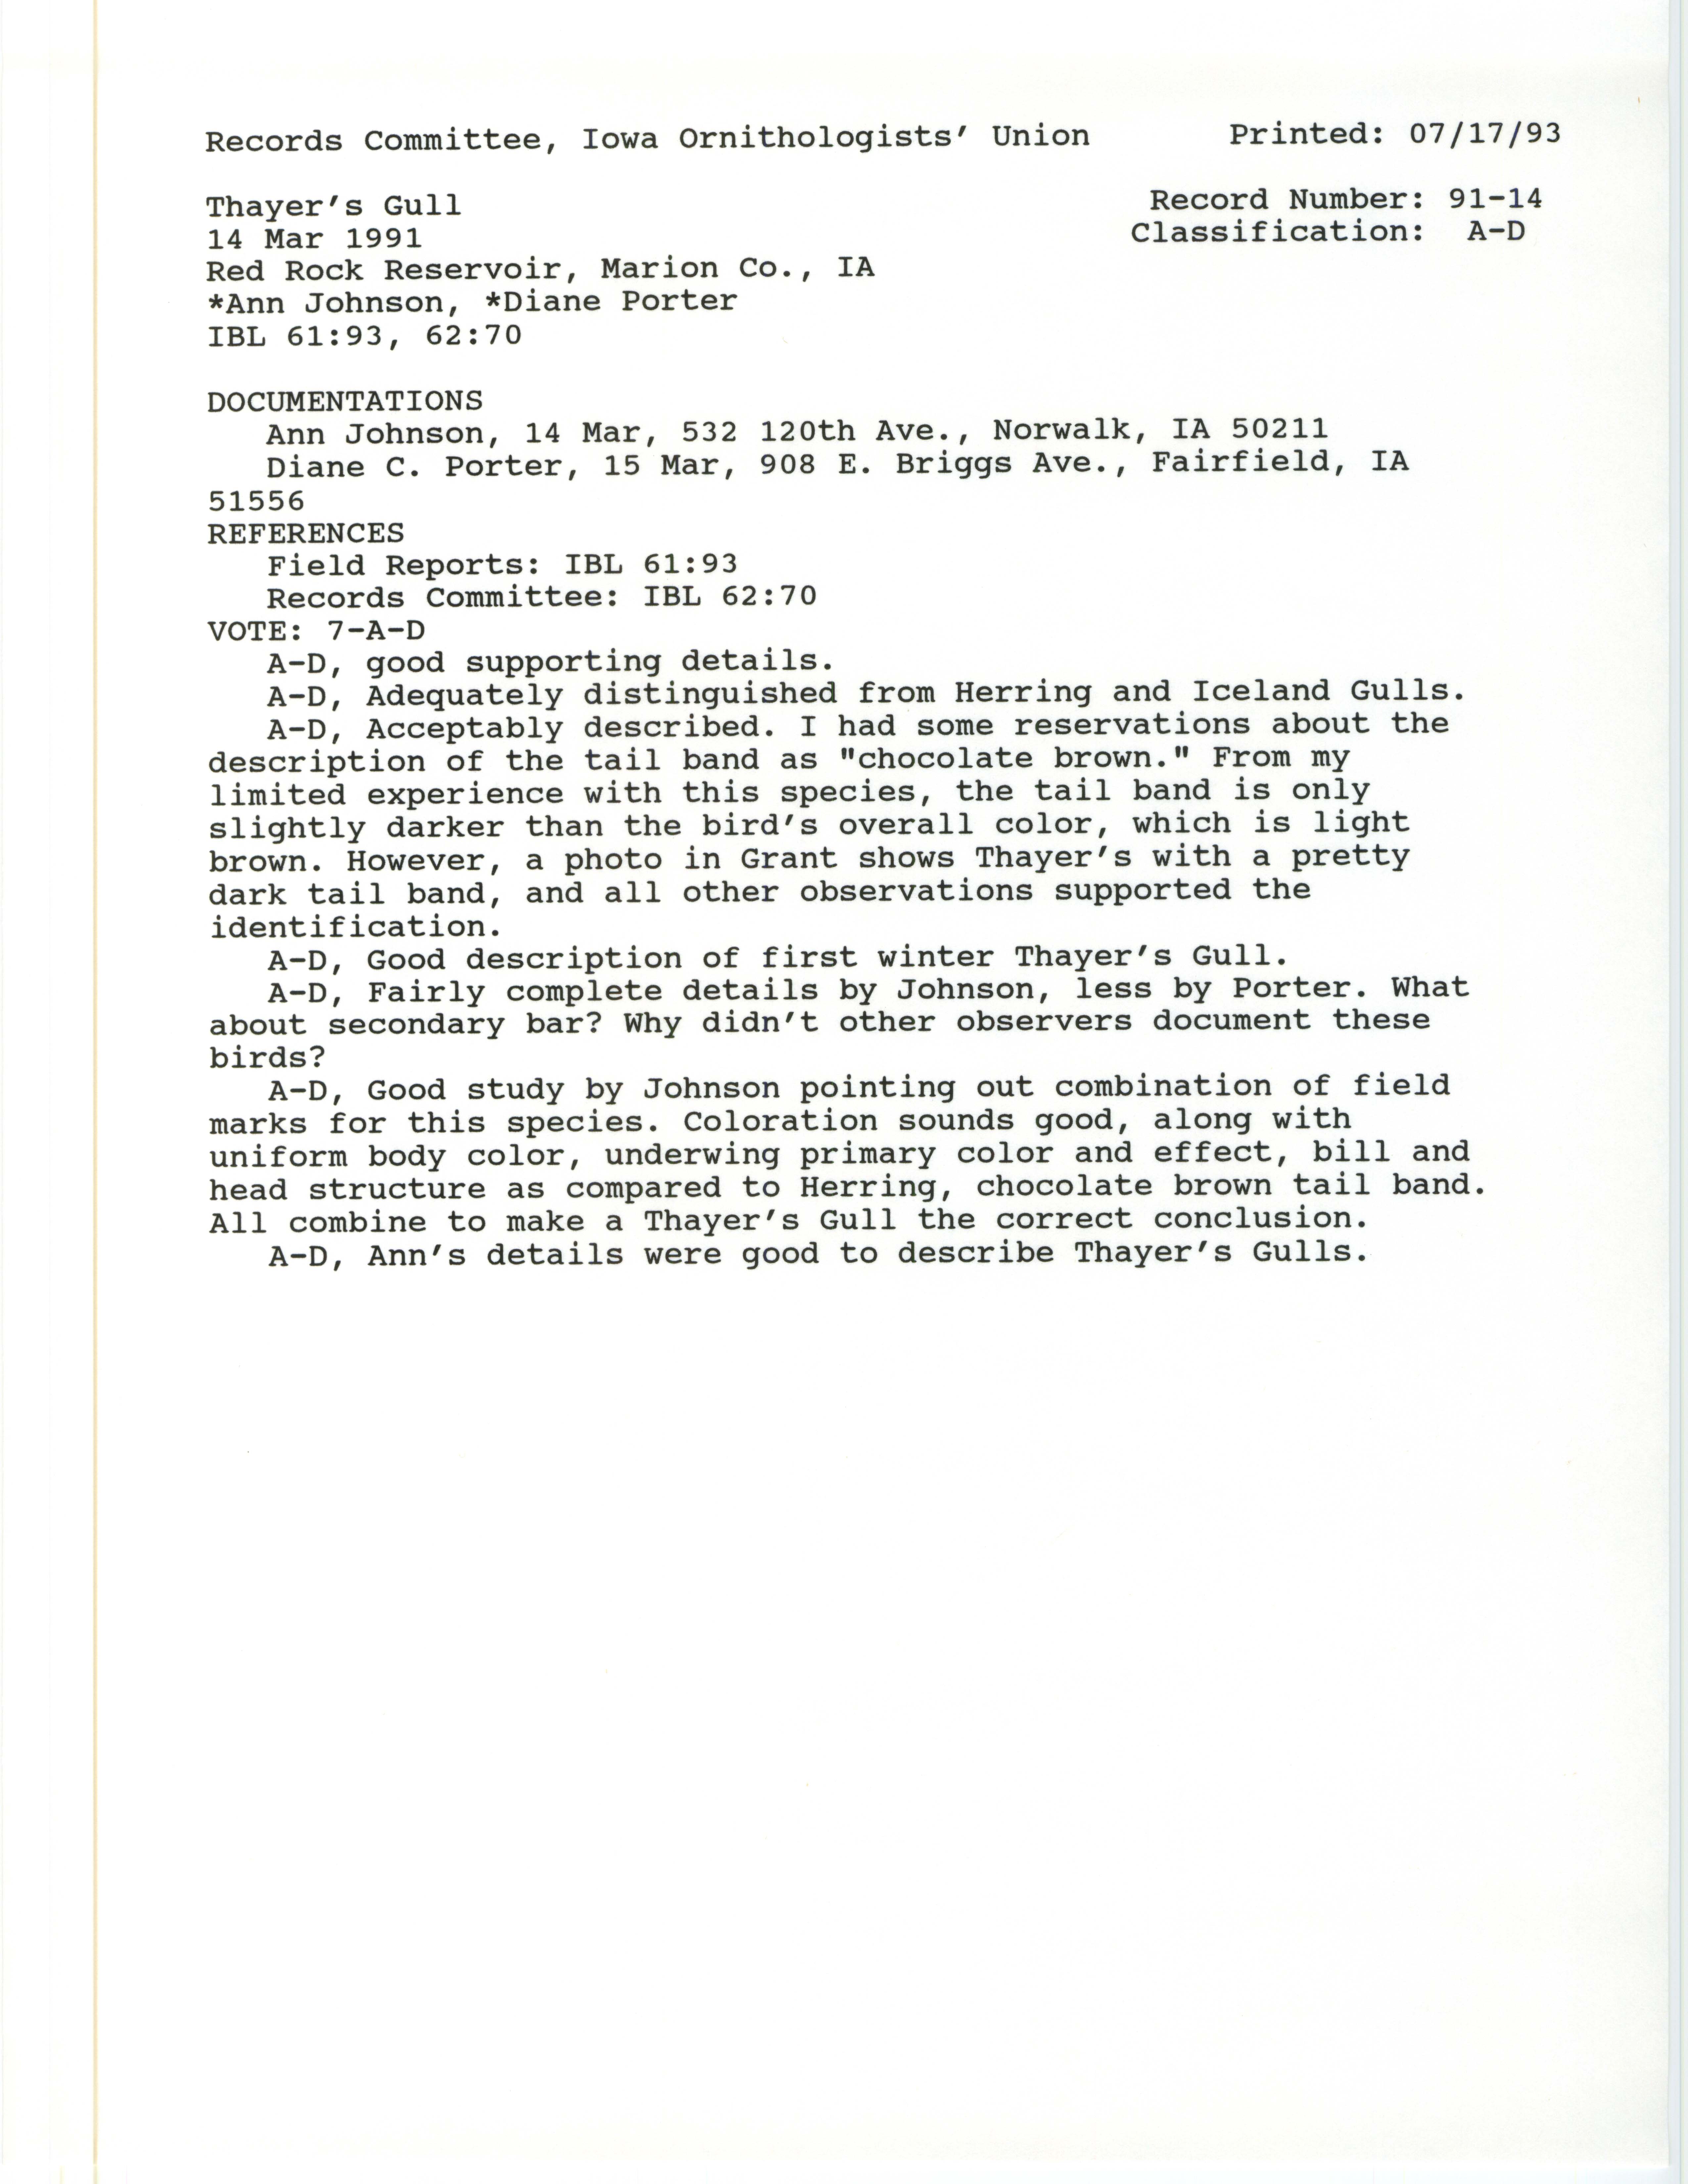 Records Committee review for rare bird sighting of Thayer's Gull at Red Rock Reservoir Dam, 1991